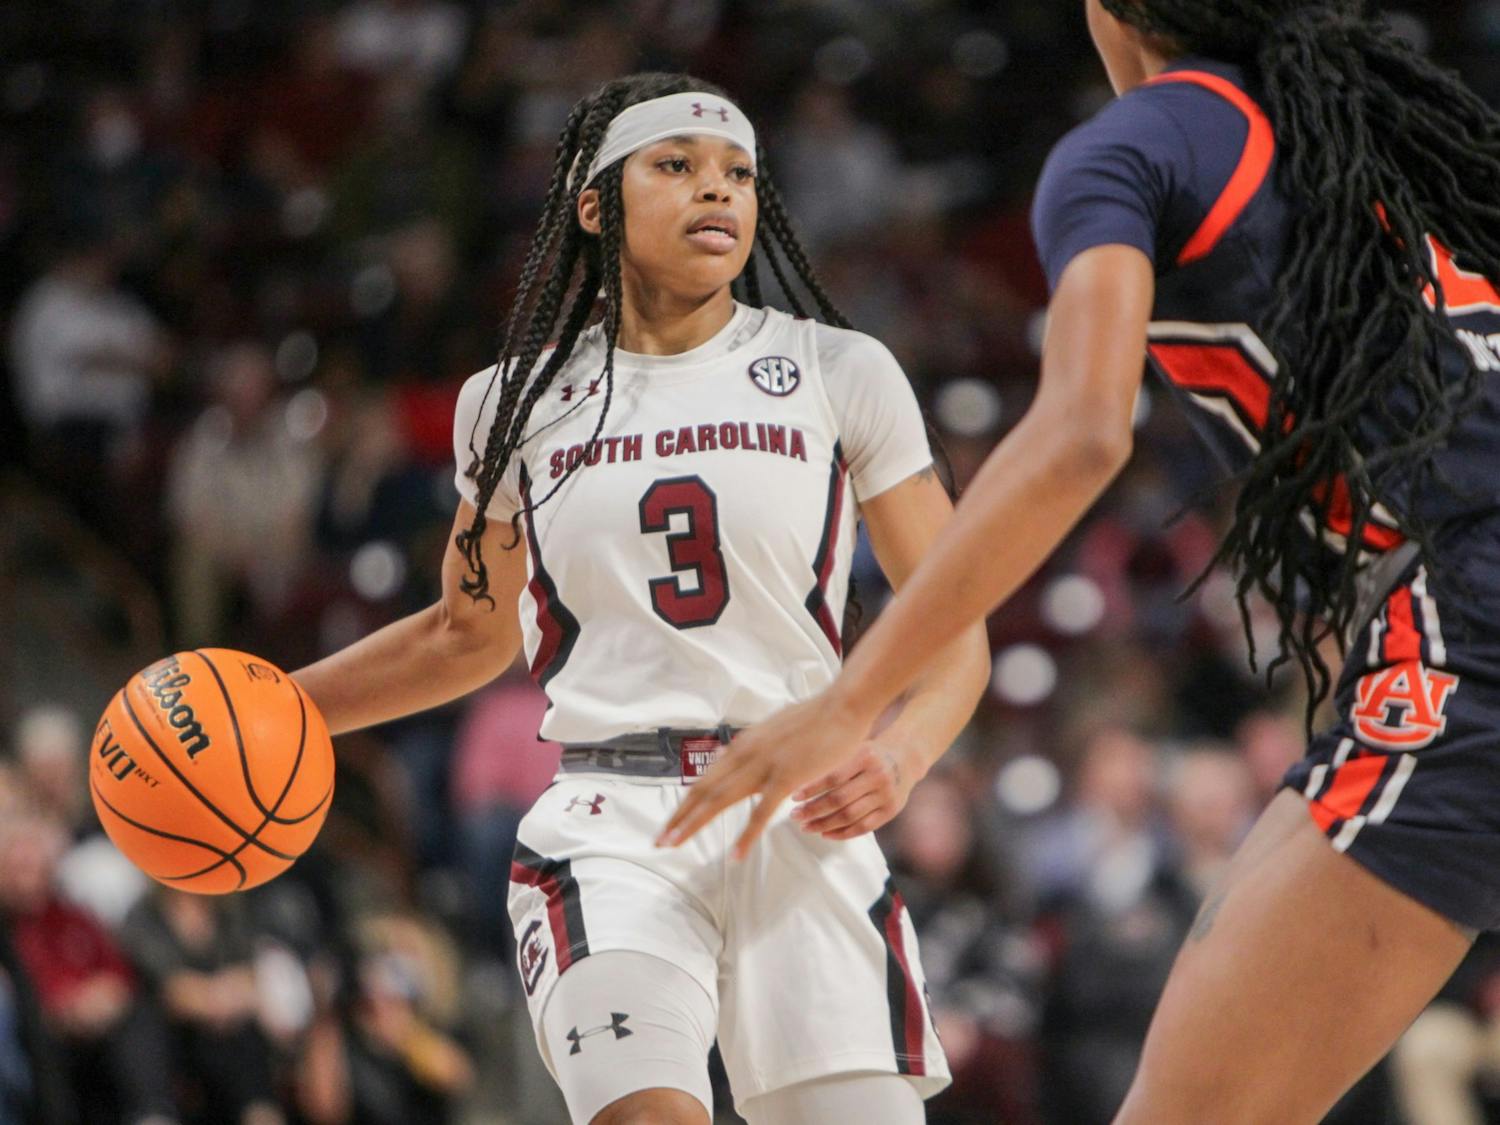 Senior guard Destanni Henderson looks for an open teammate during a game on Feb. 17, 2022 at Colonial Life Arena in Columbia, SC. The Gamecocks beat Auburn 75-38.